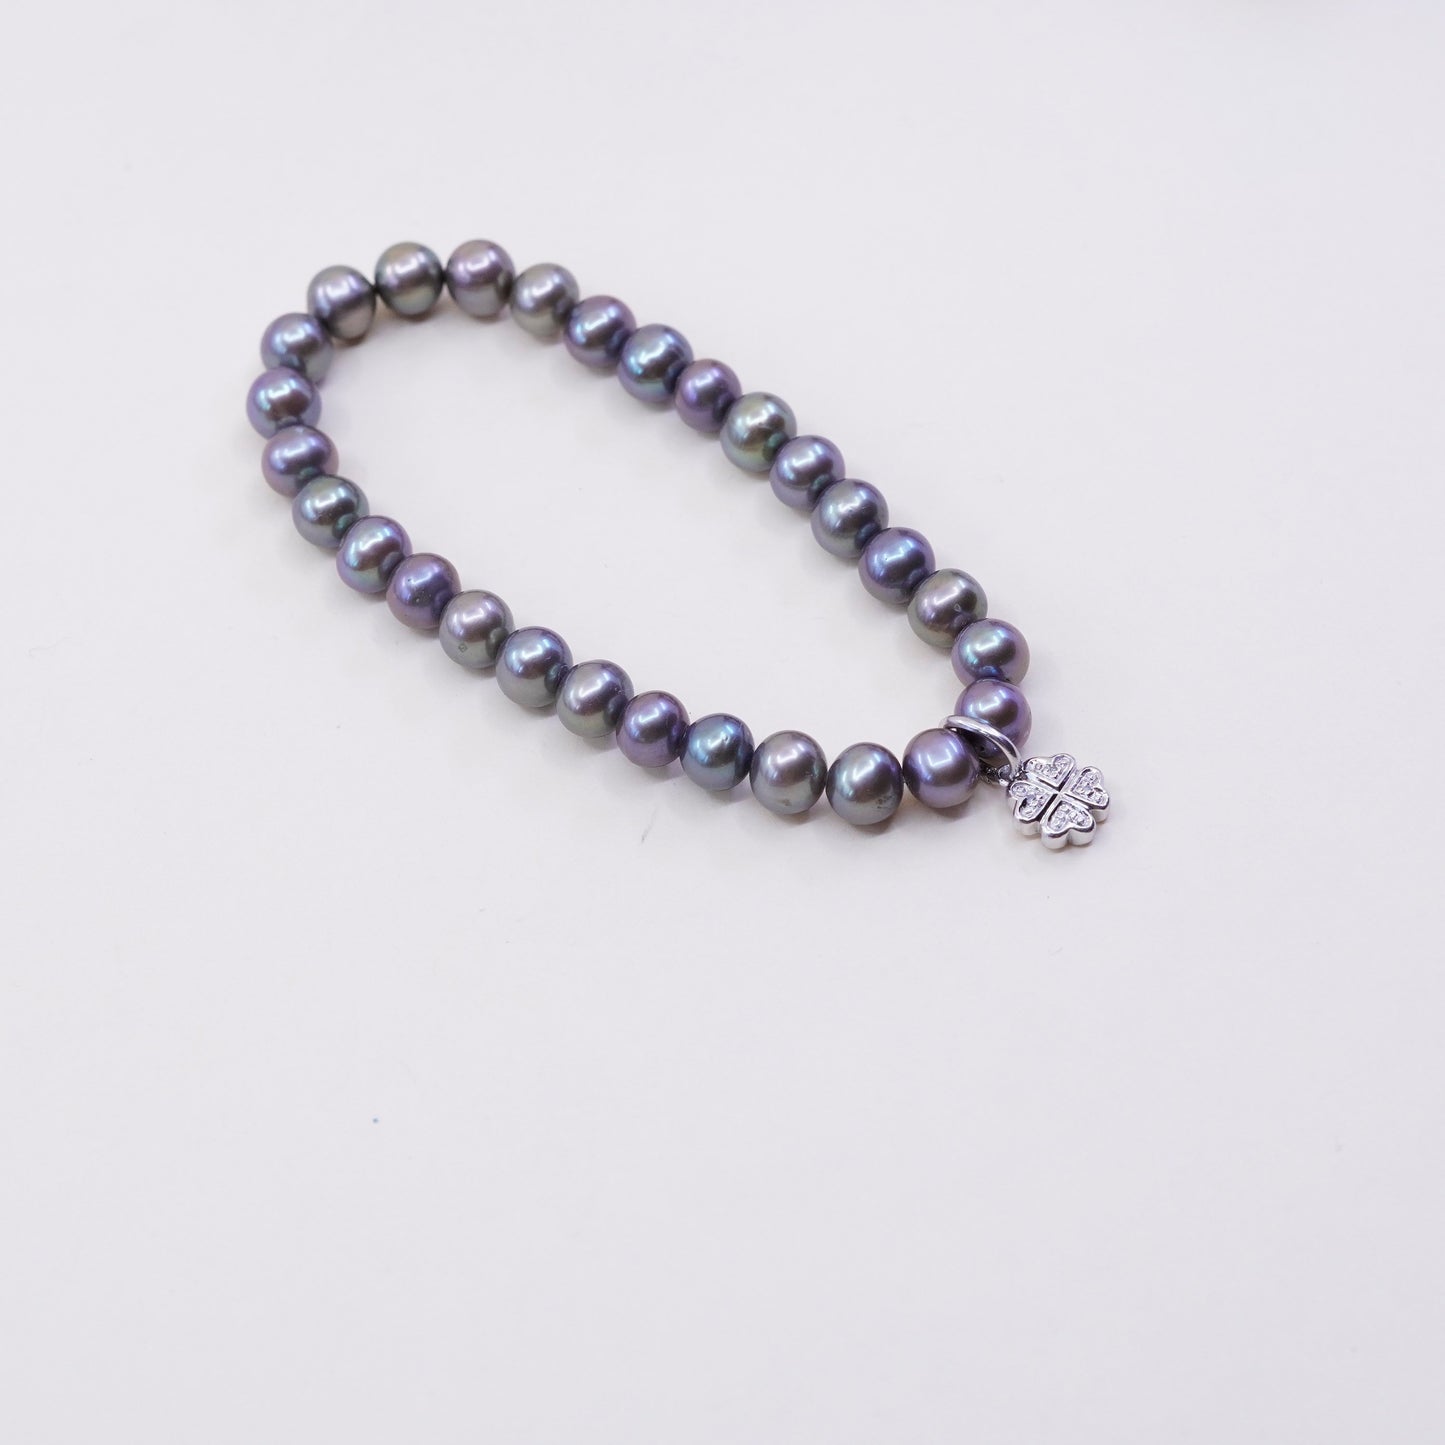 7”, bracelet, black pearl with elastic band and 925 silver lucky clover charm,